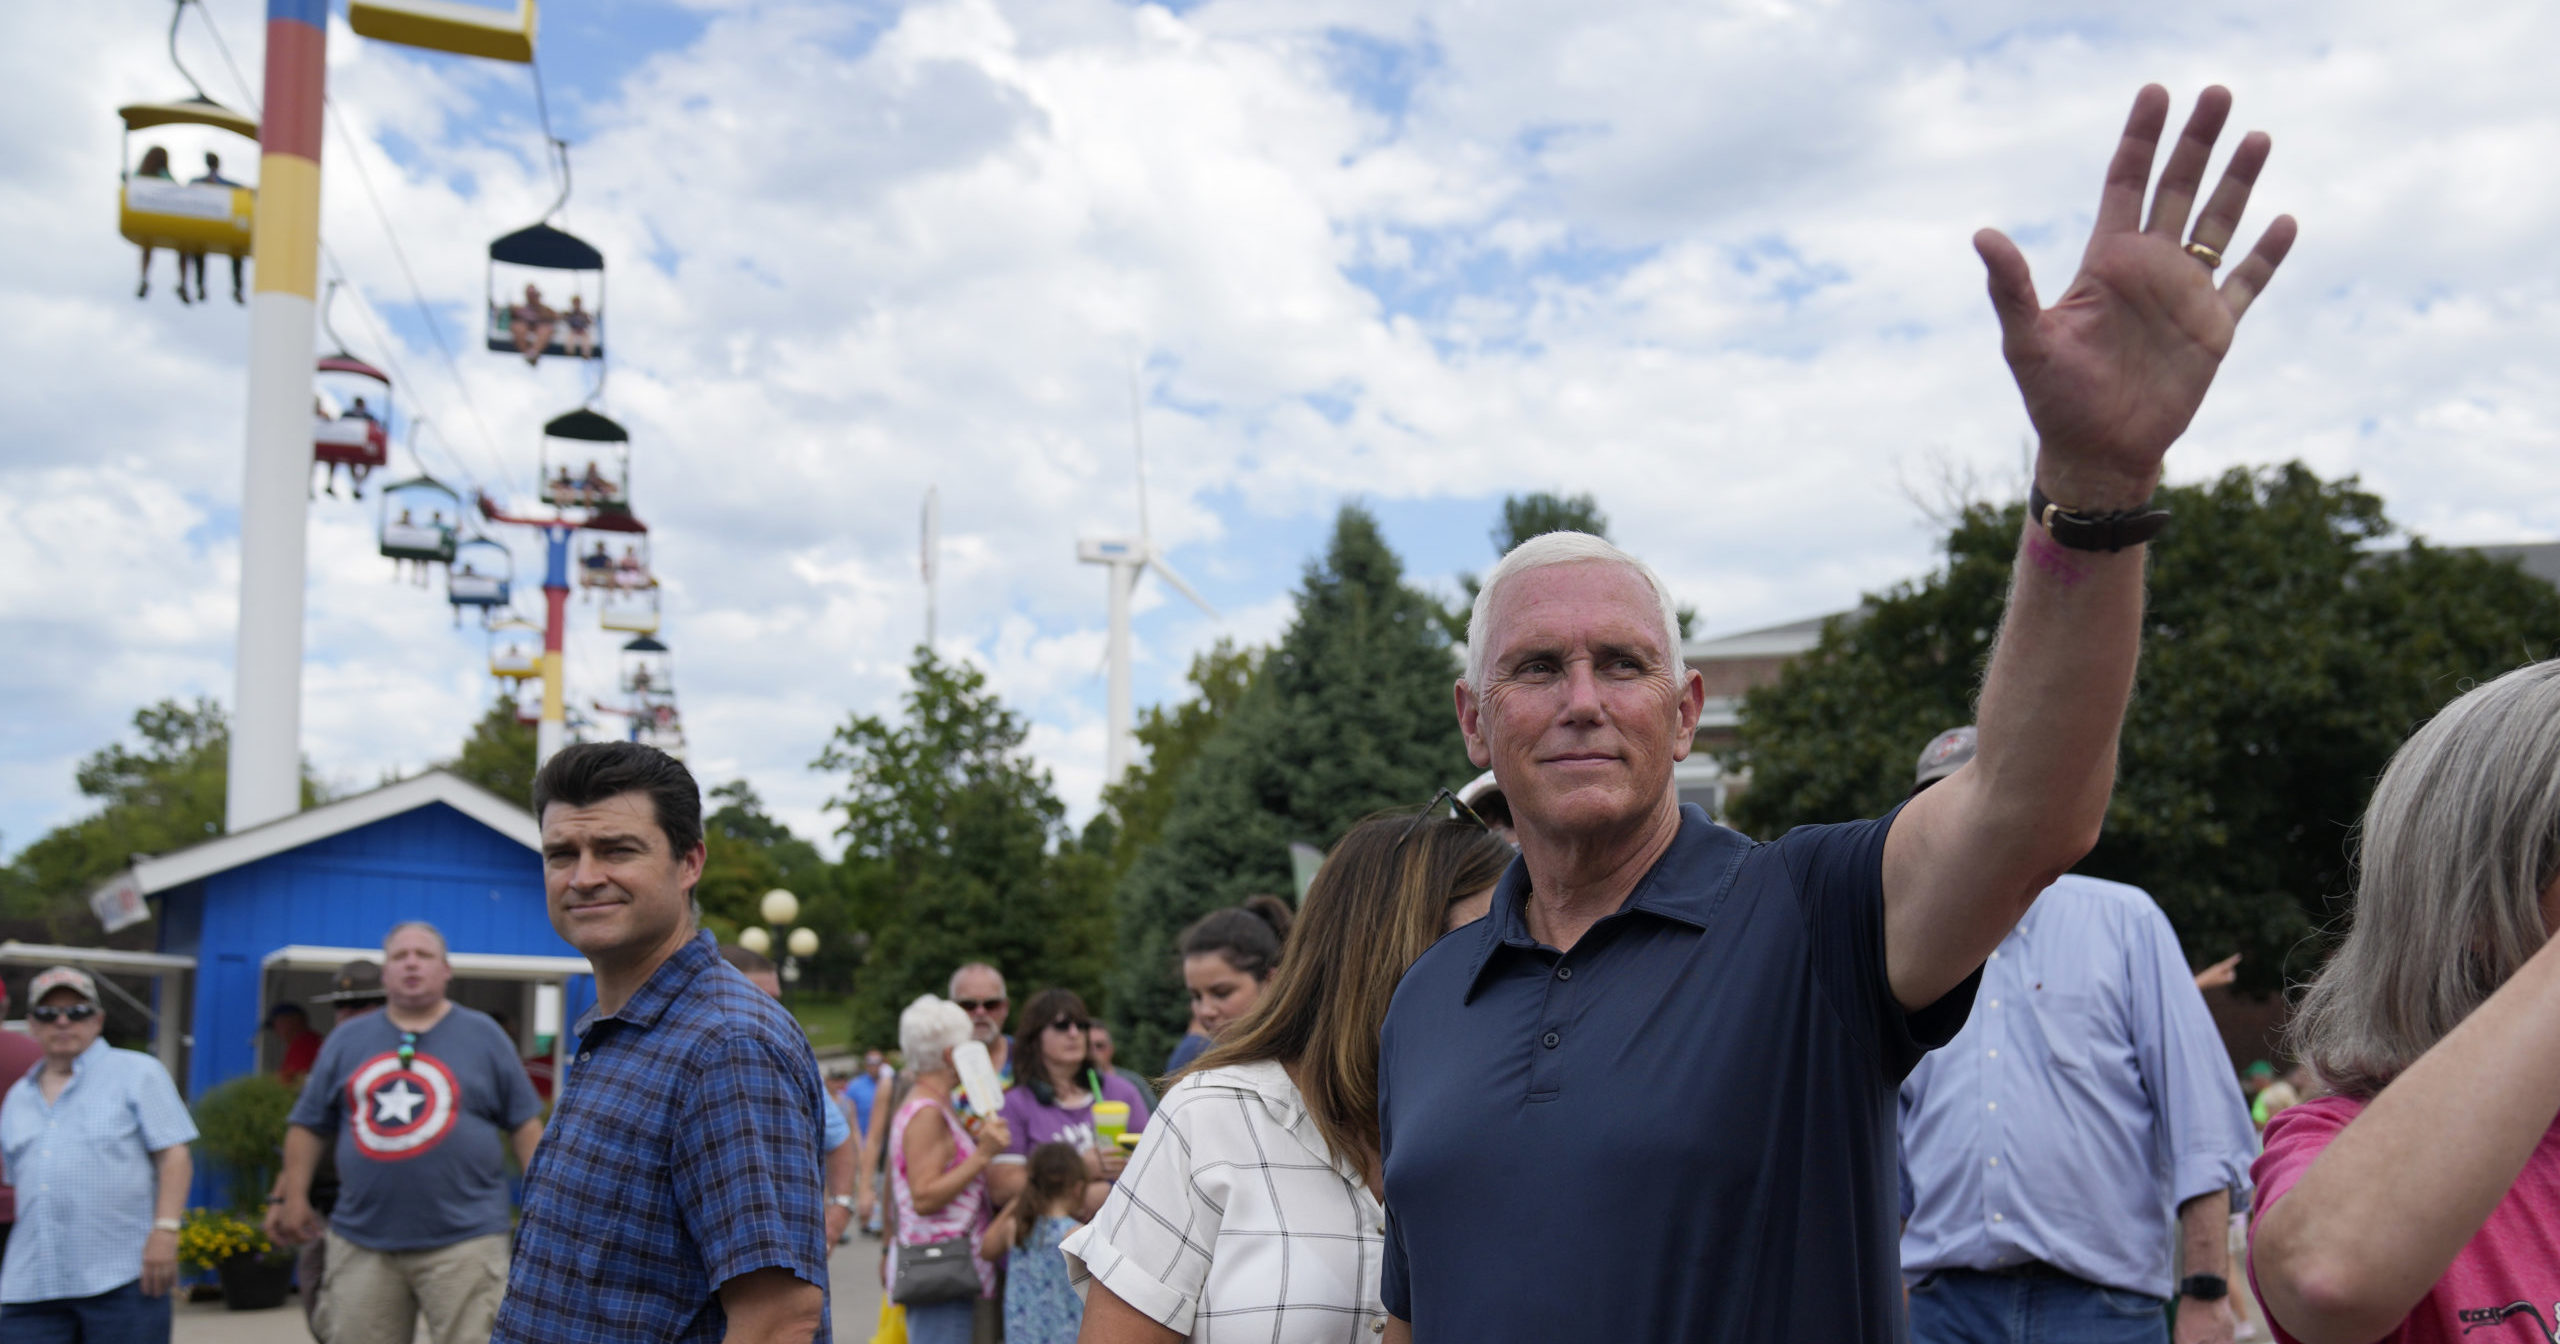 Republican presidential candidate former Vice President Mike Pence waves as he tours the grounds at the Iowa State Fair, Friday, Aug. 11, 2023, in Des Moines, Iowa.